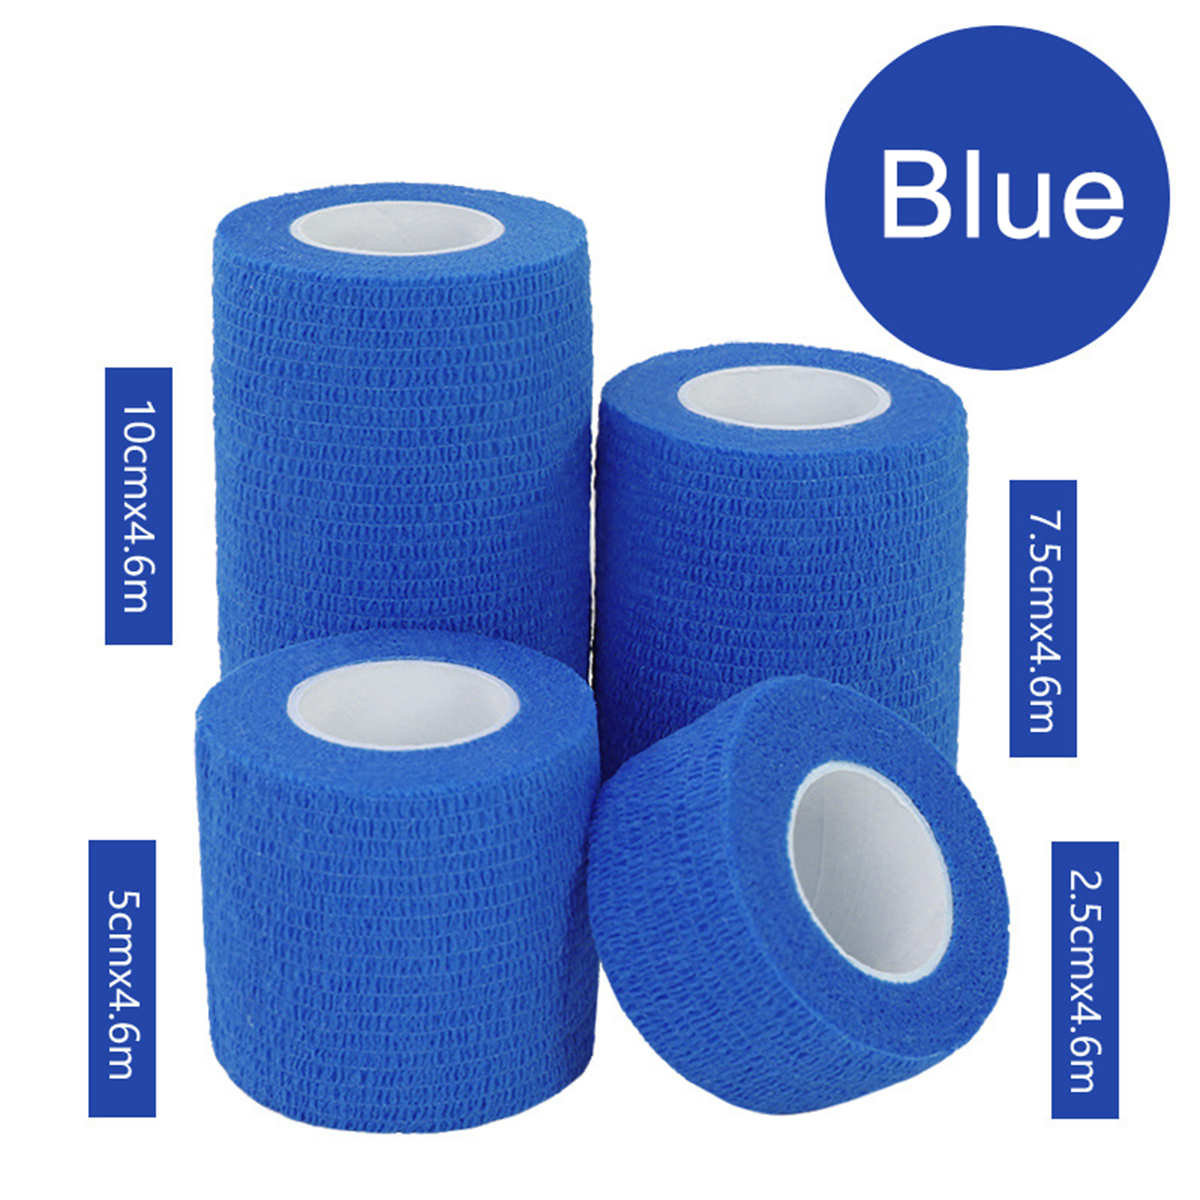 Colorful-Self-Adhesive-Sport-Pet-Support-Elastic-Bandage-Finger-Joint-Wrap-Injury-Tape-1147126